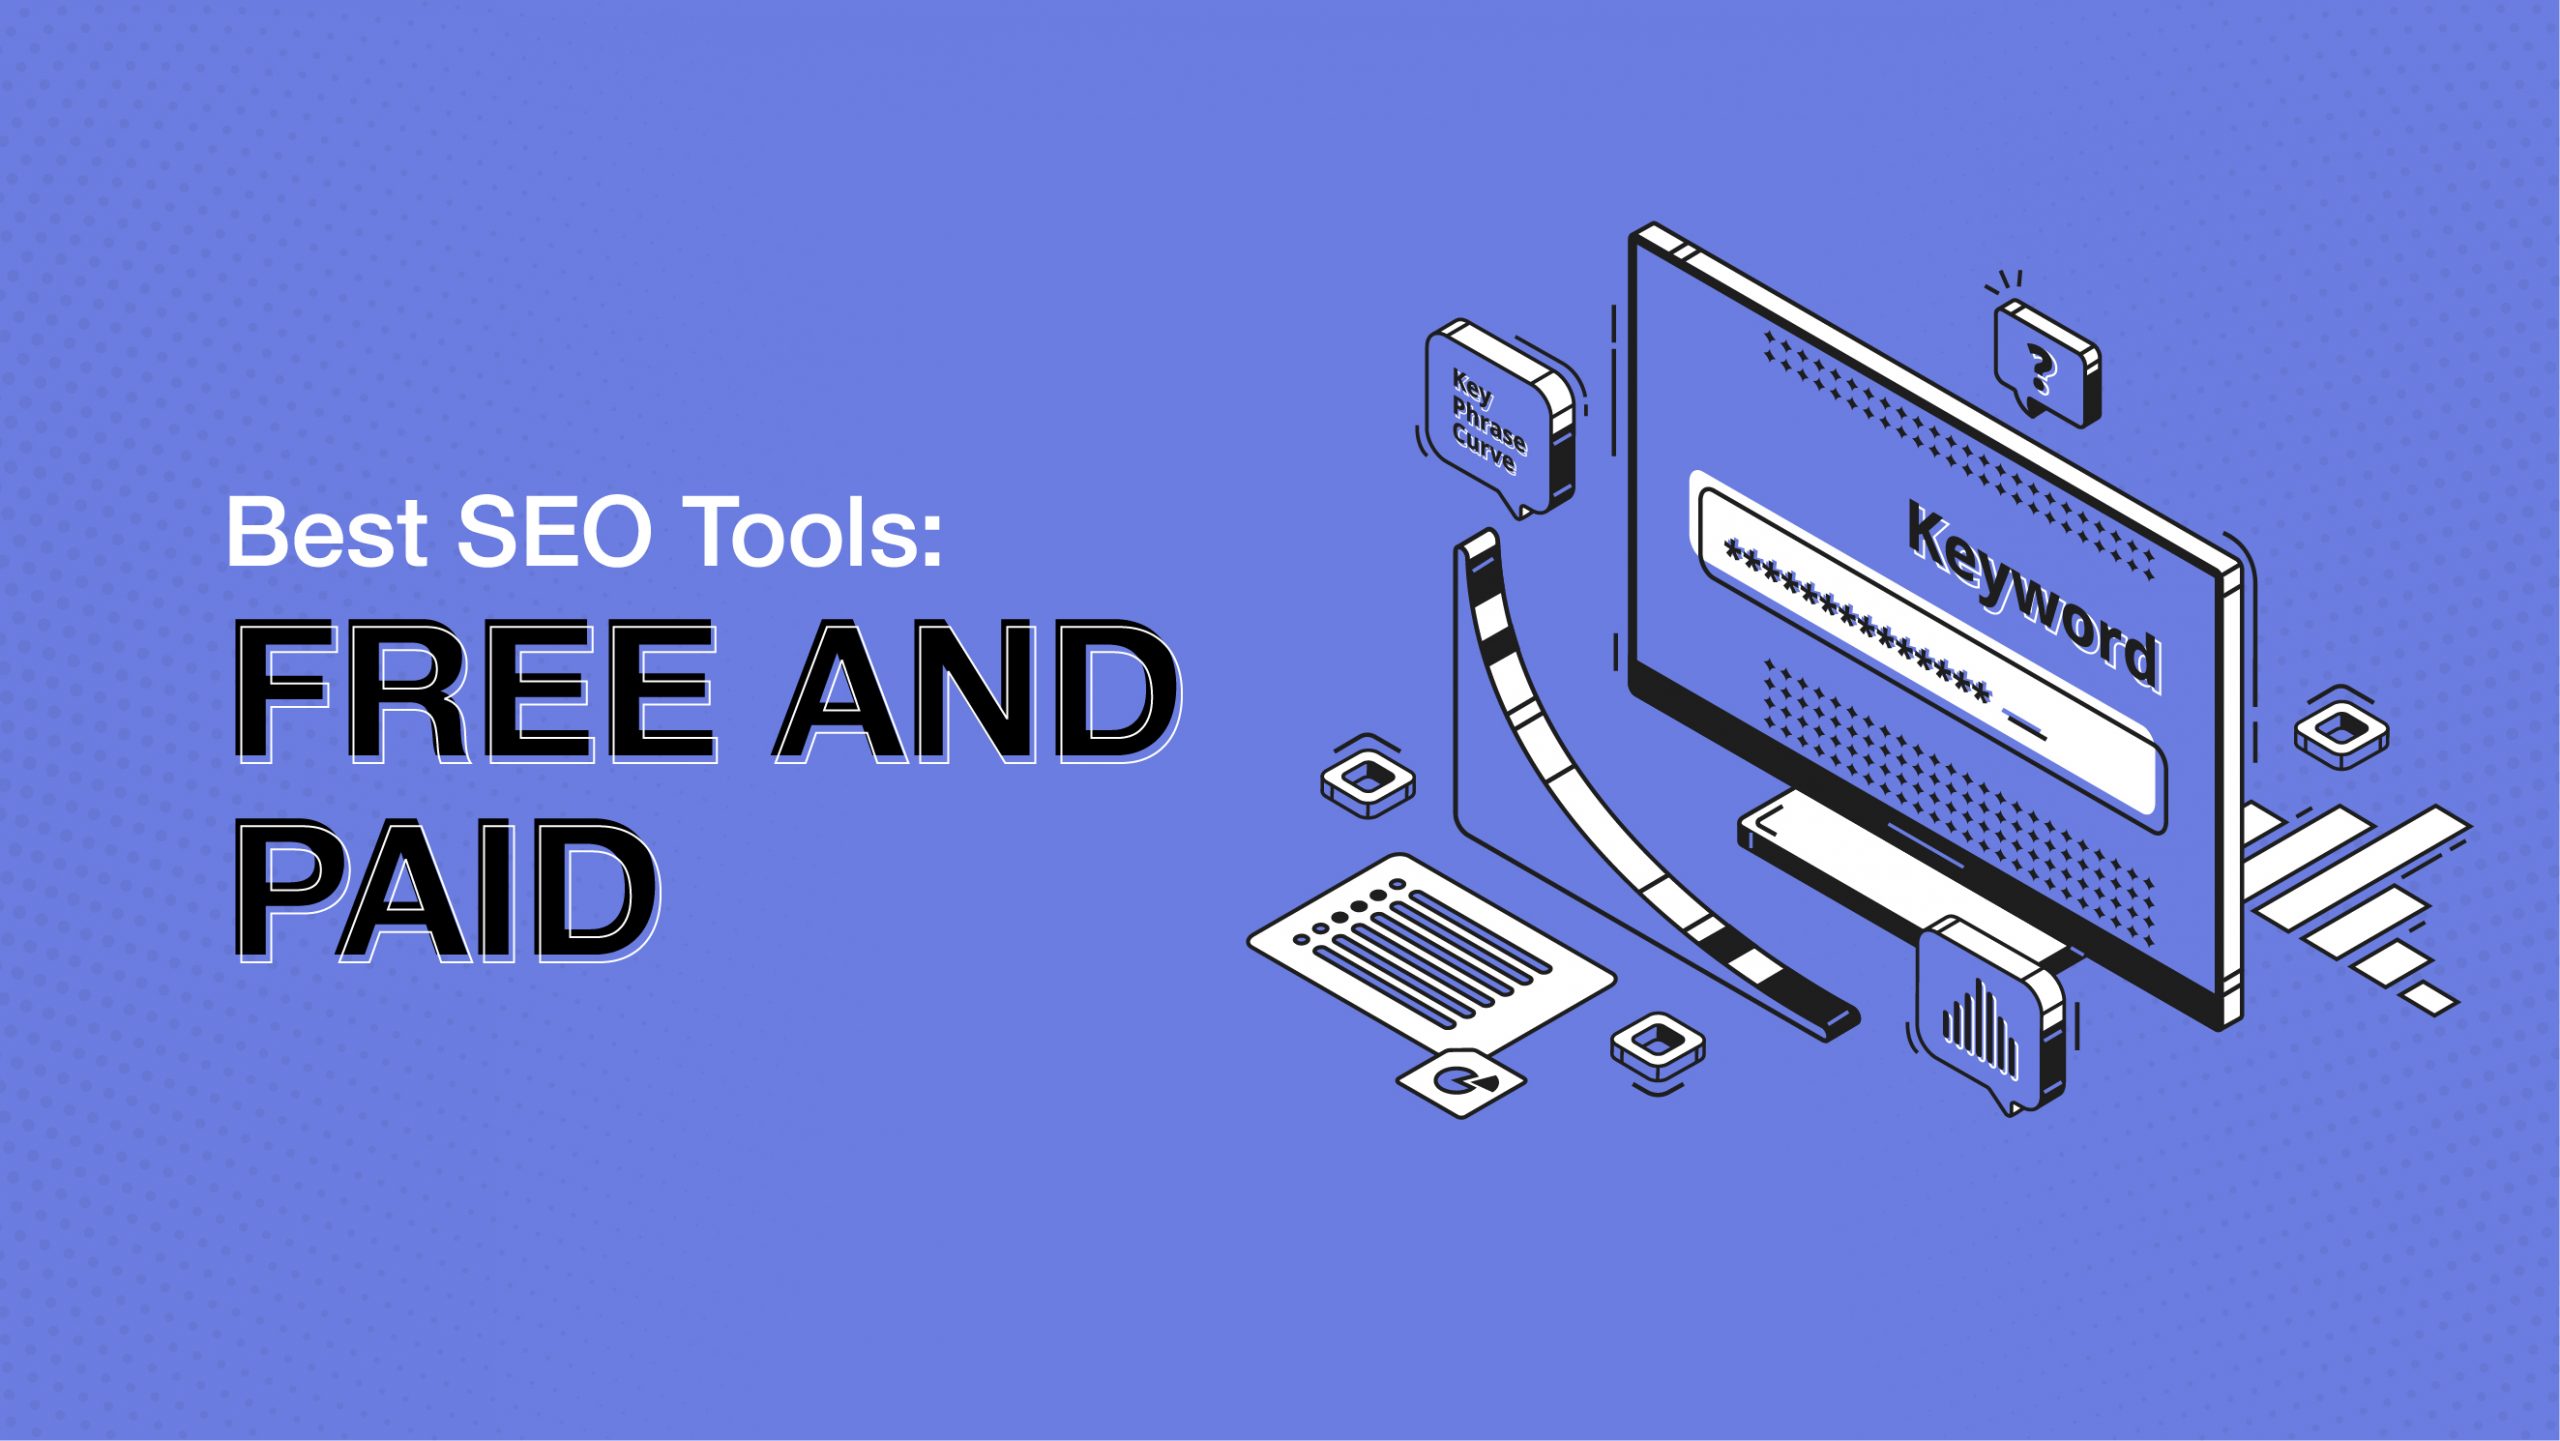 Best SEO Tools: Free and Paid